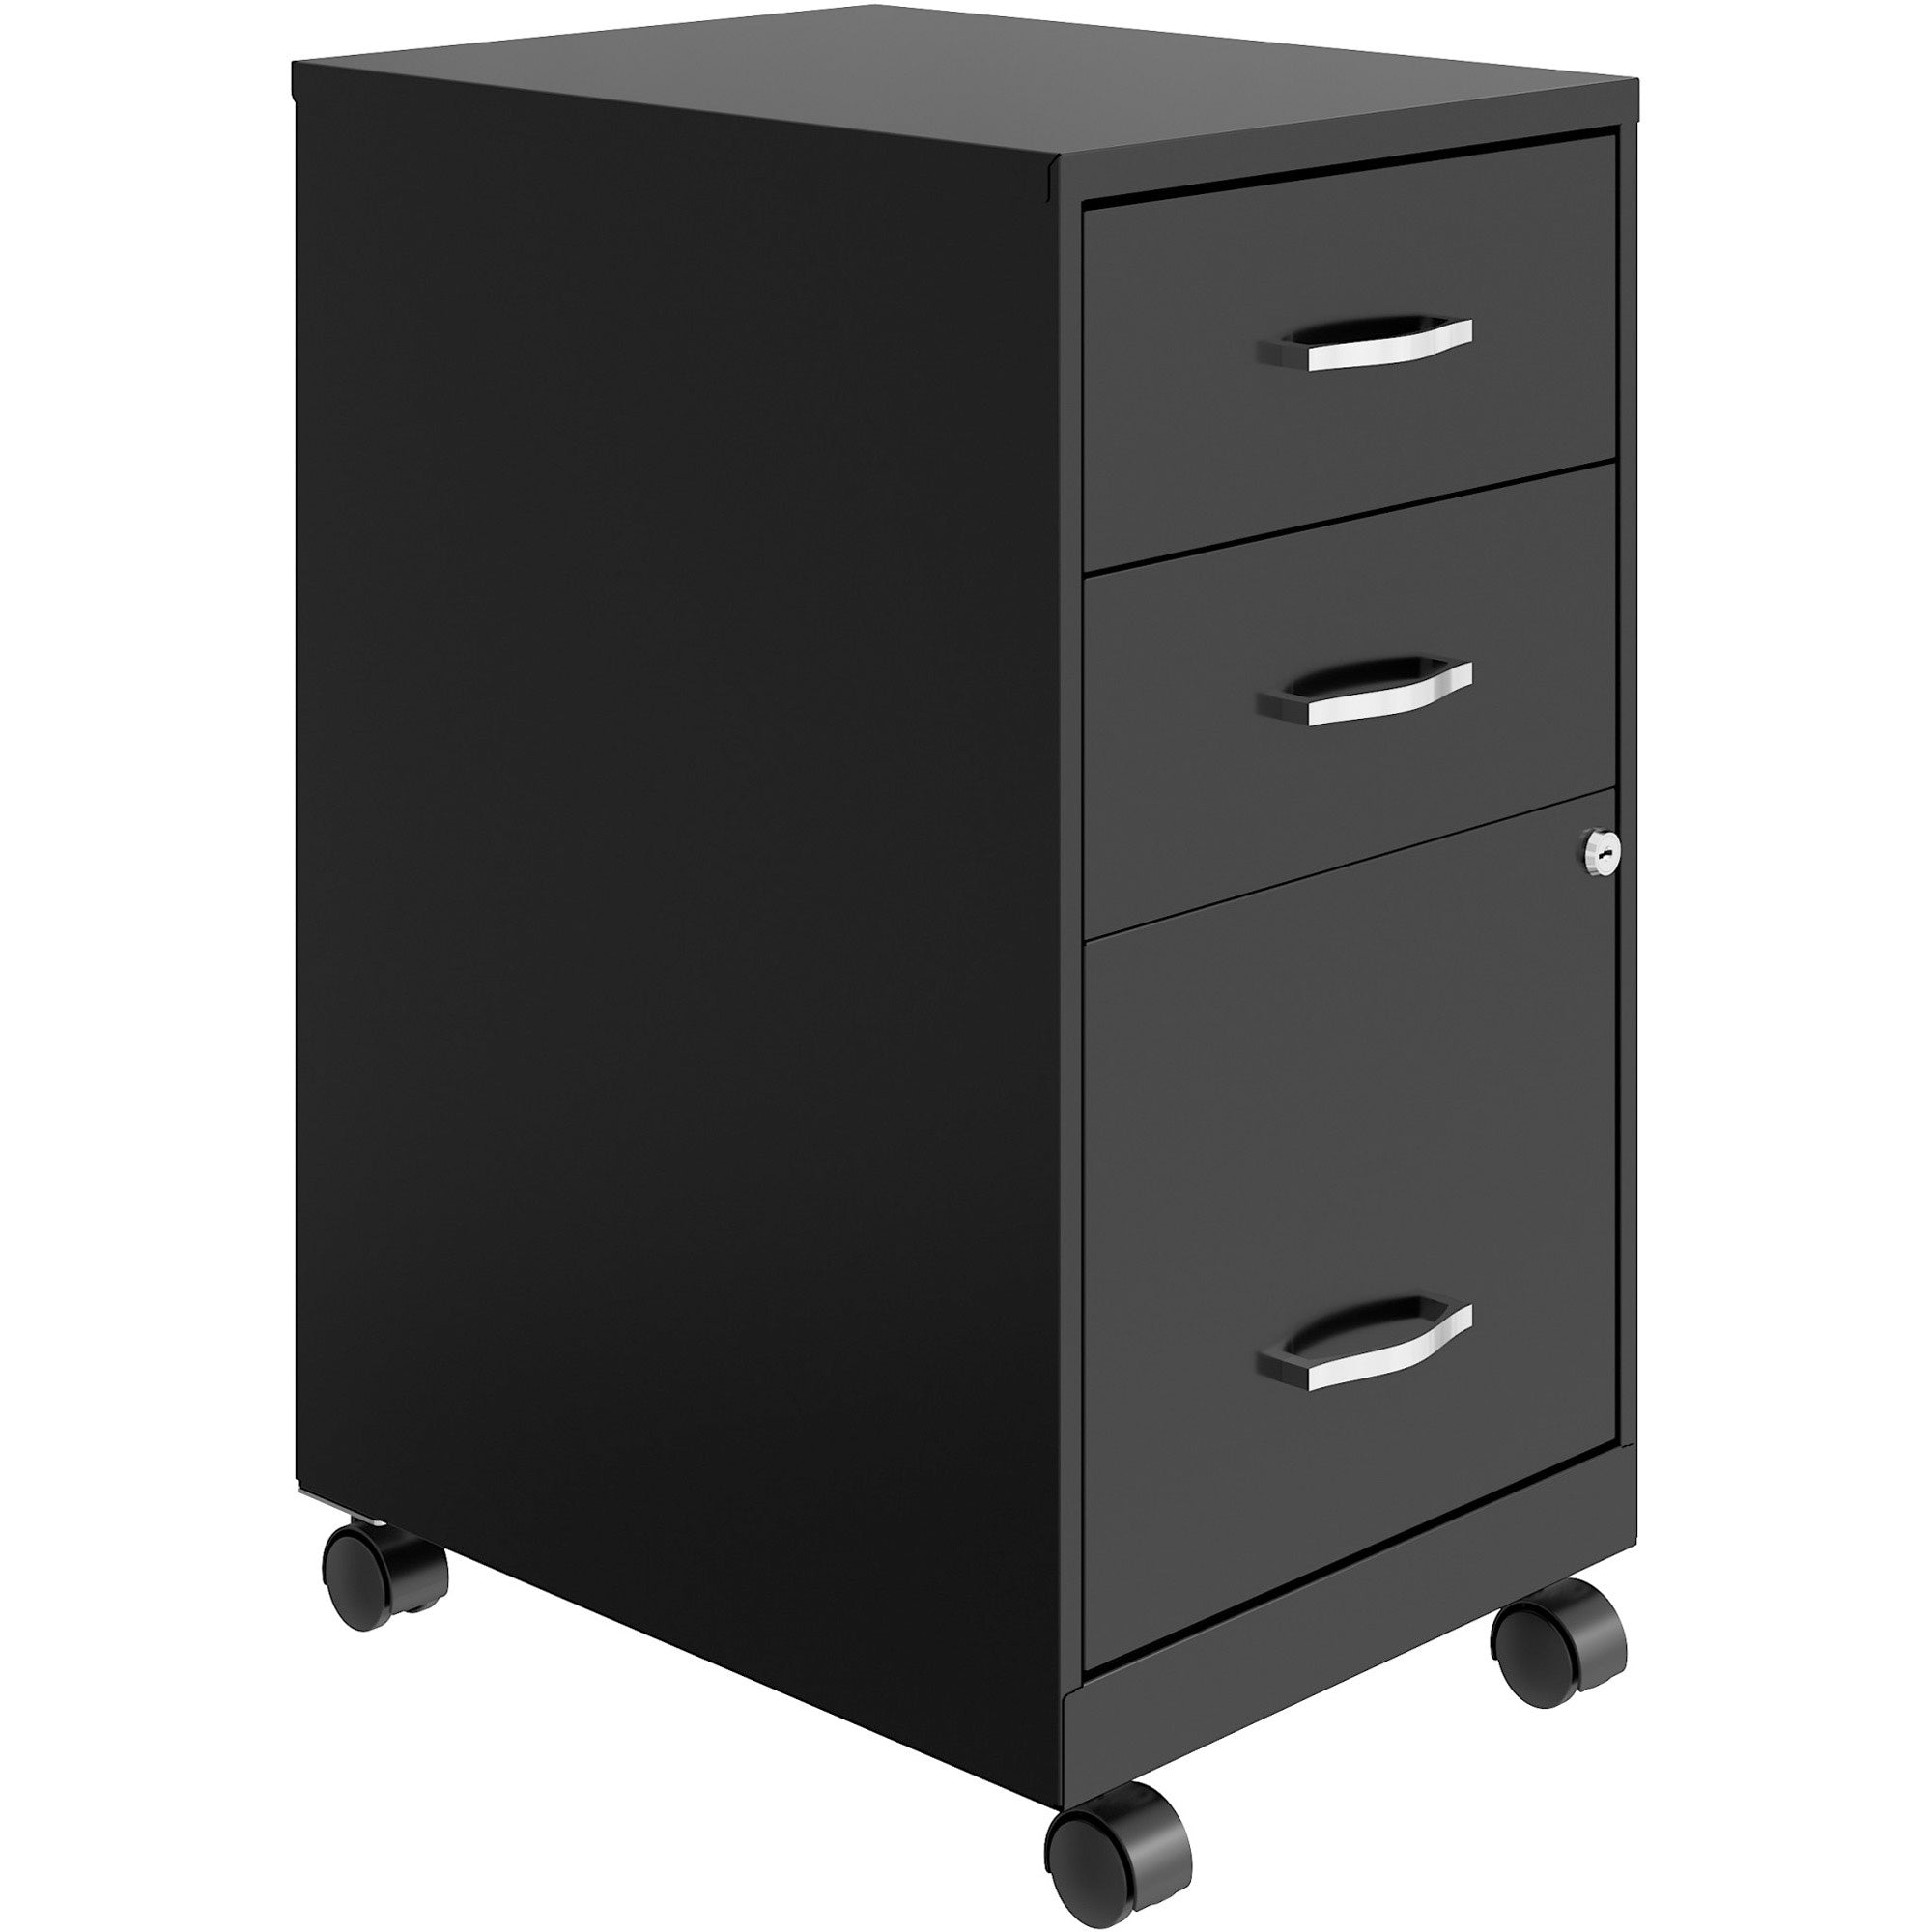 nusparc-3-drawer-organizer-metal-file-cabinet-142-x-18-x-267-3-x-drawers-for-file-box-letter-glide-suspension-3-4-drawer-extension-anti-tip-lockable-mobility-black-metal-recycled_nprvf318cmbk - 1